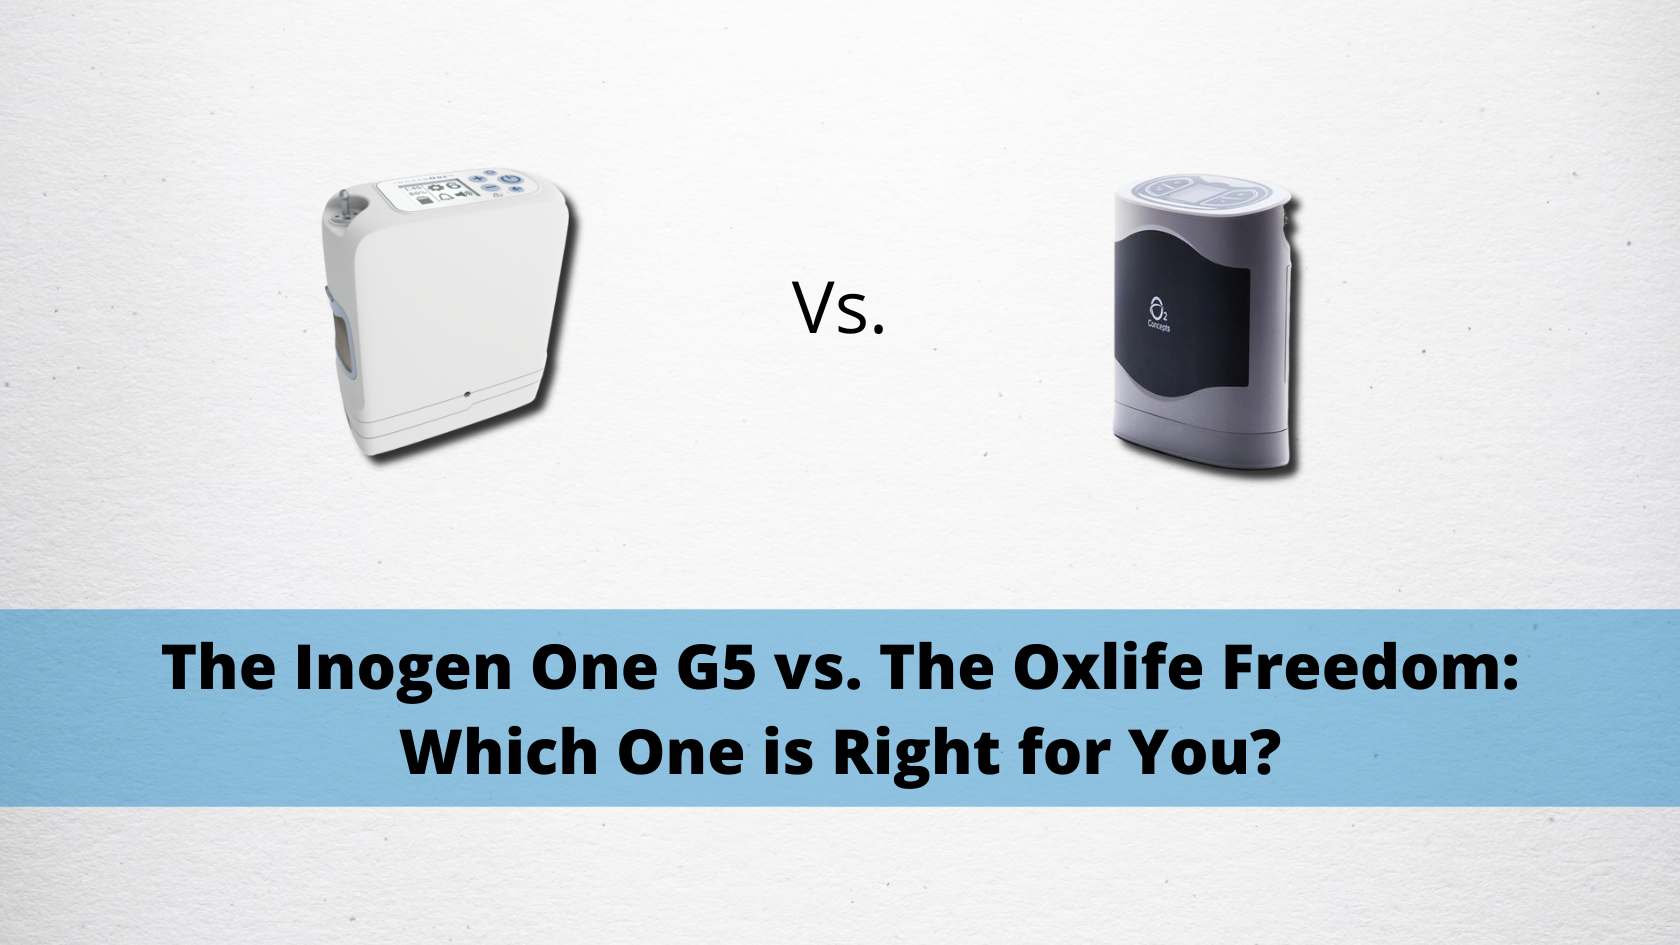 The Inogen One G5 vs. The Oxlife Freedom: Which One is Right for You